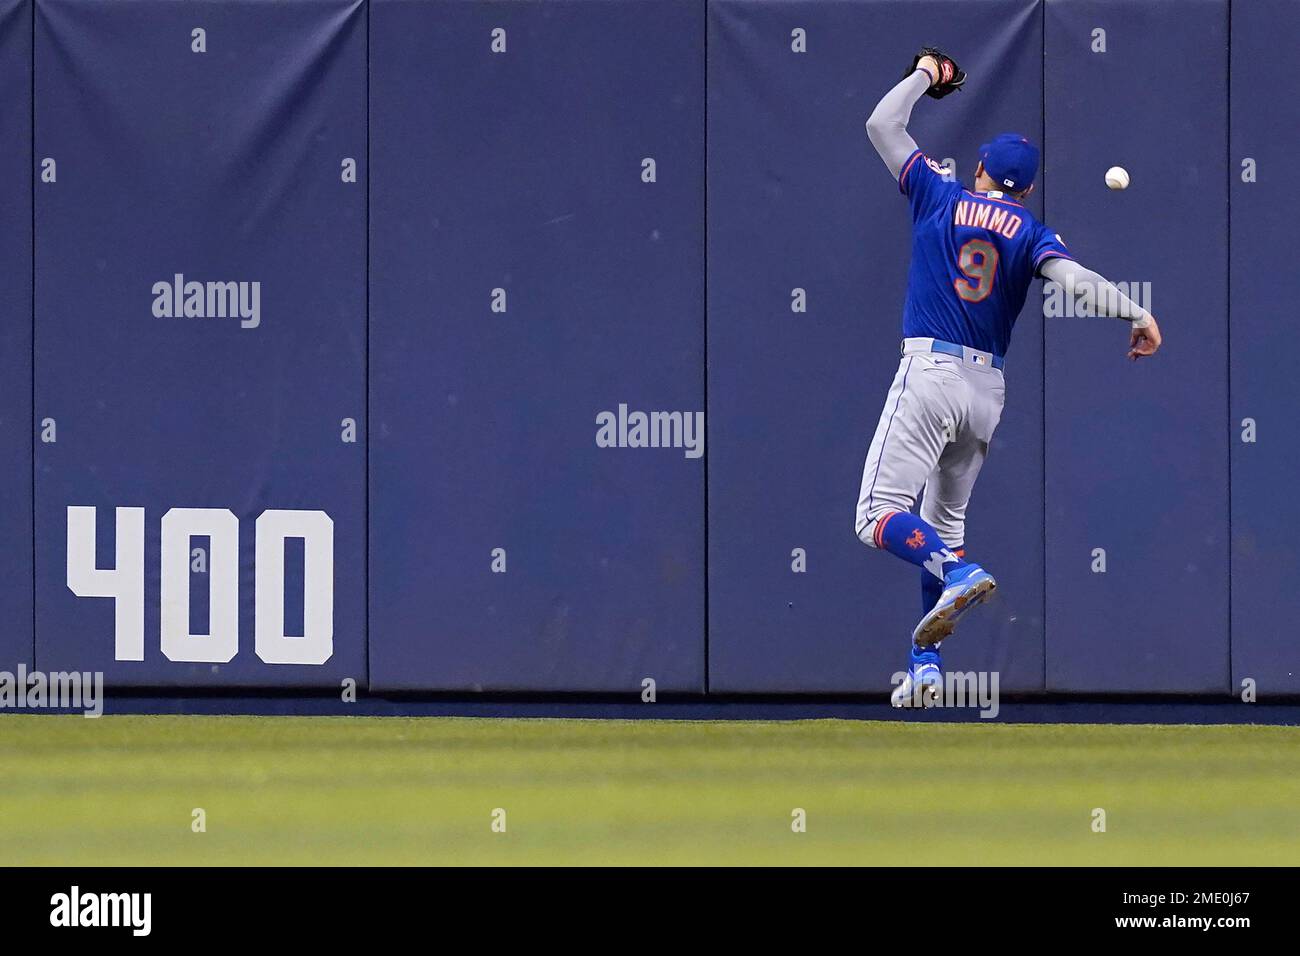 2,000 Brandon nimmo Stock Pictures, Editorial Images and Stock Photos